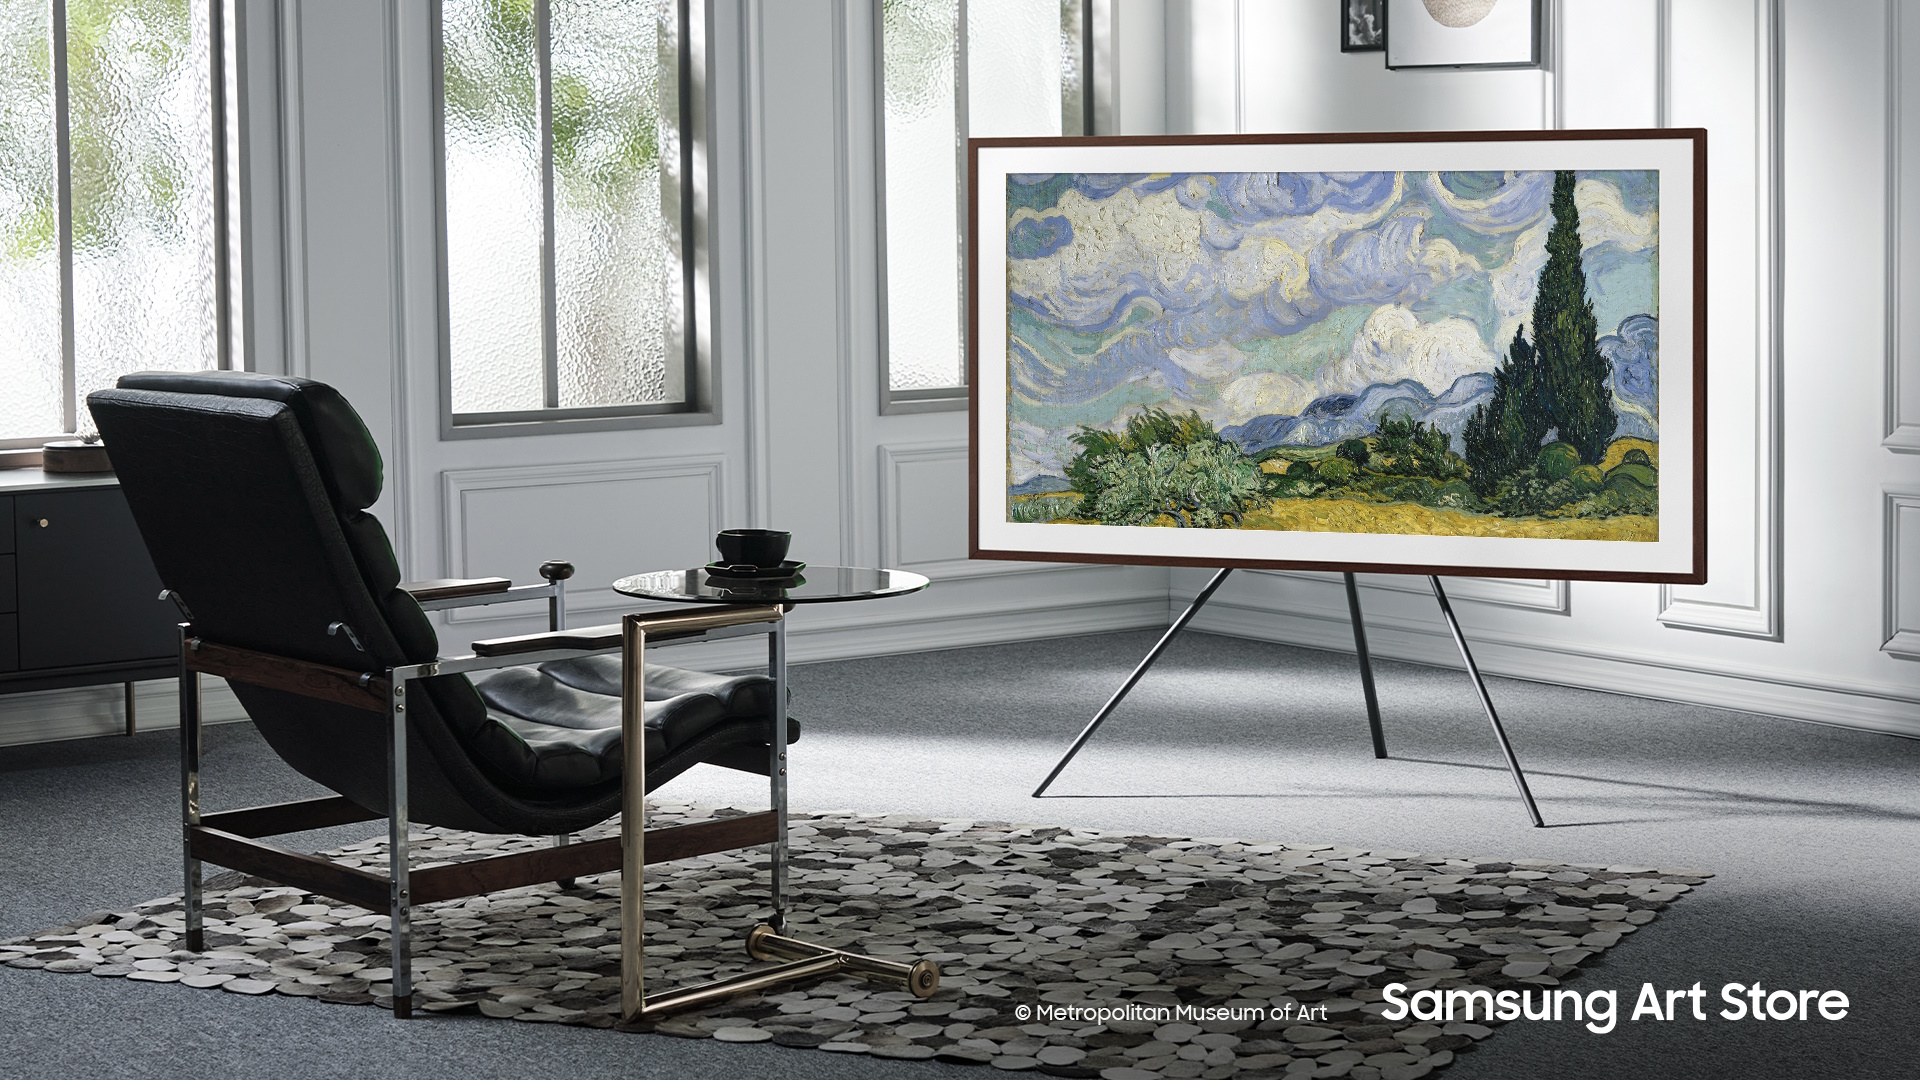 Samsung The Frame TVs will now display the most famous works of art